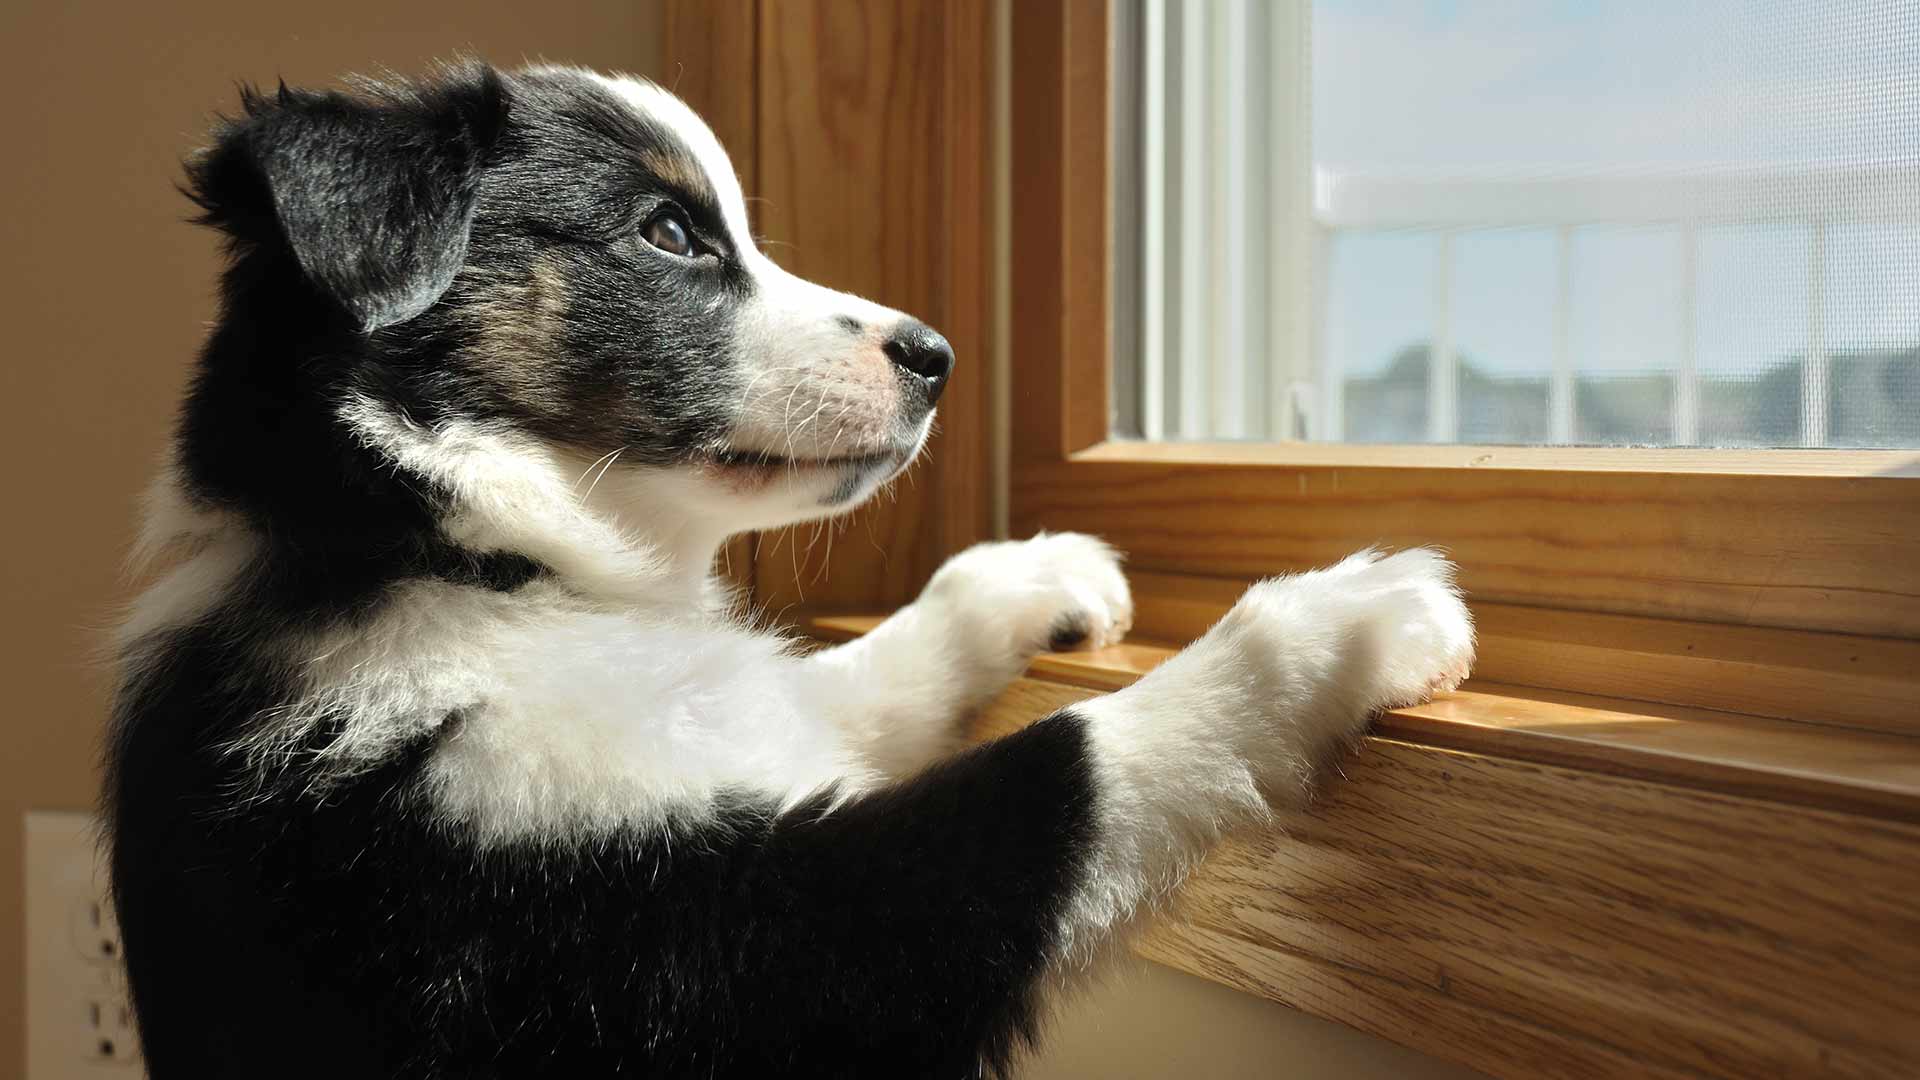 Solved: Can a Pet Door Fit in a Window?